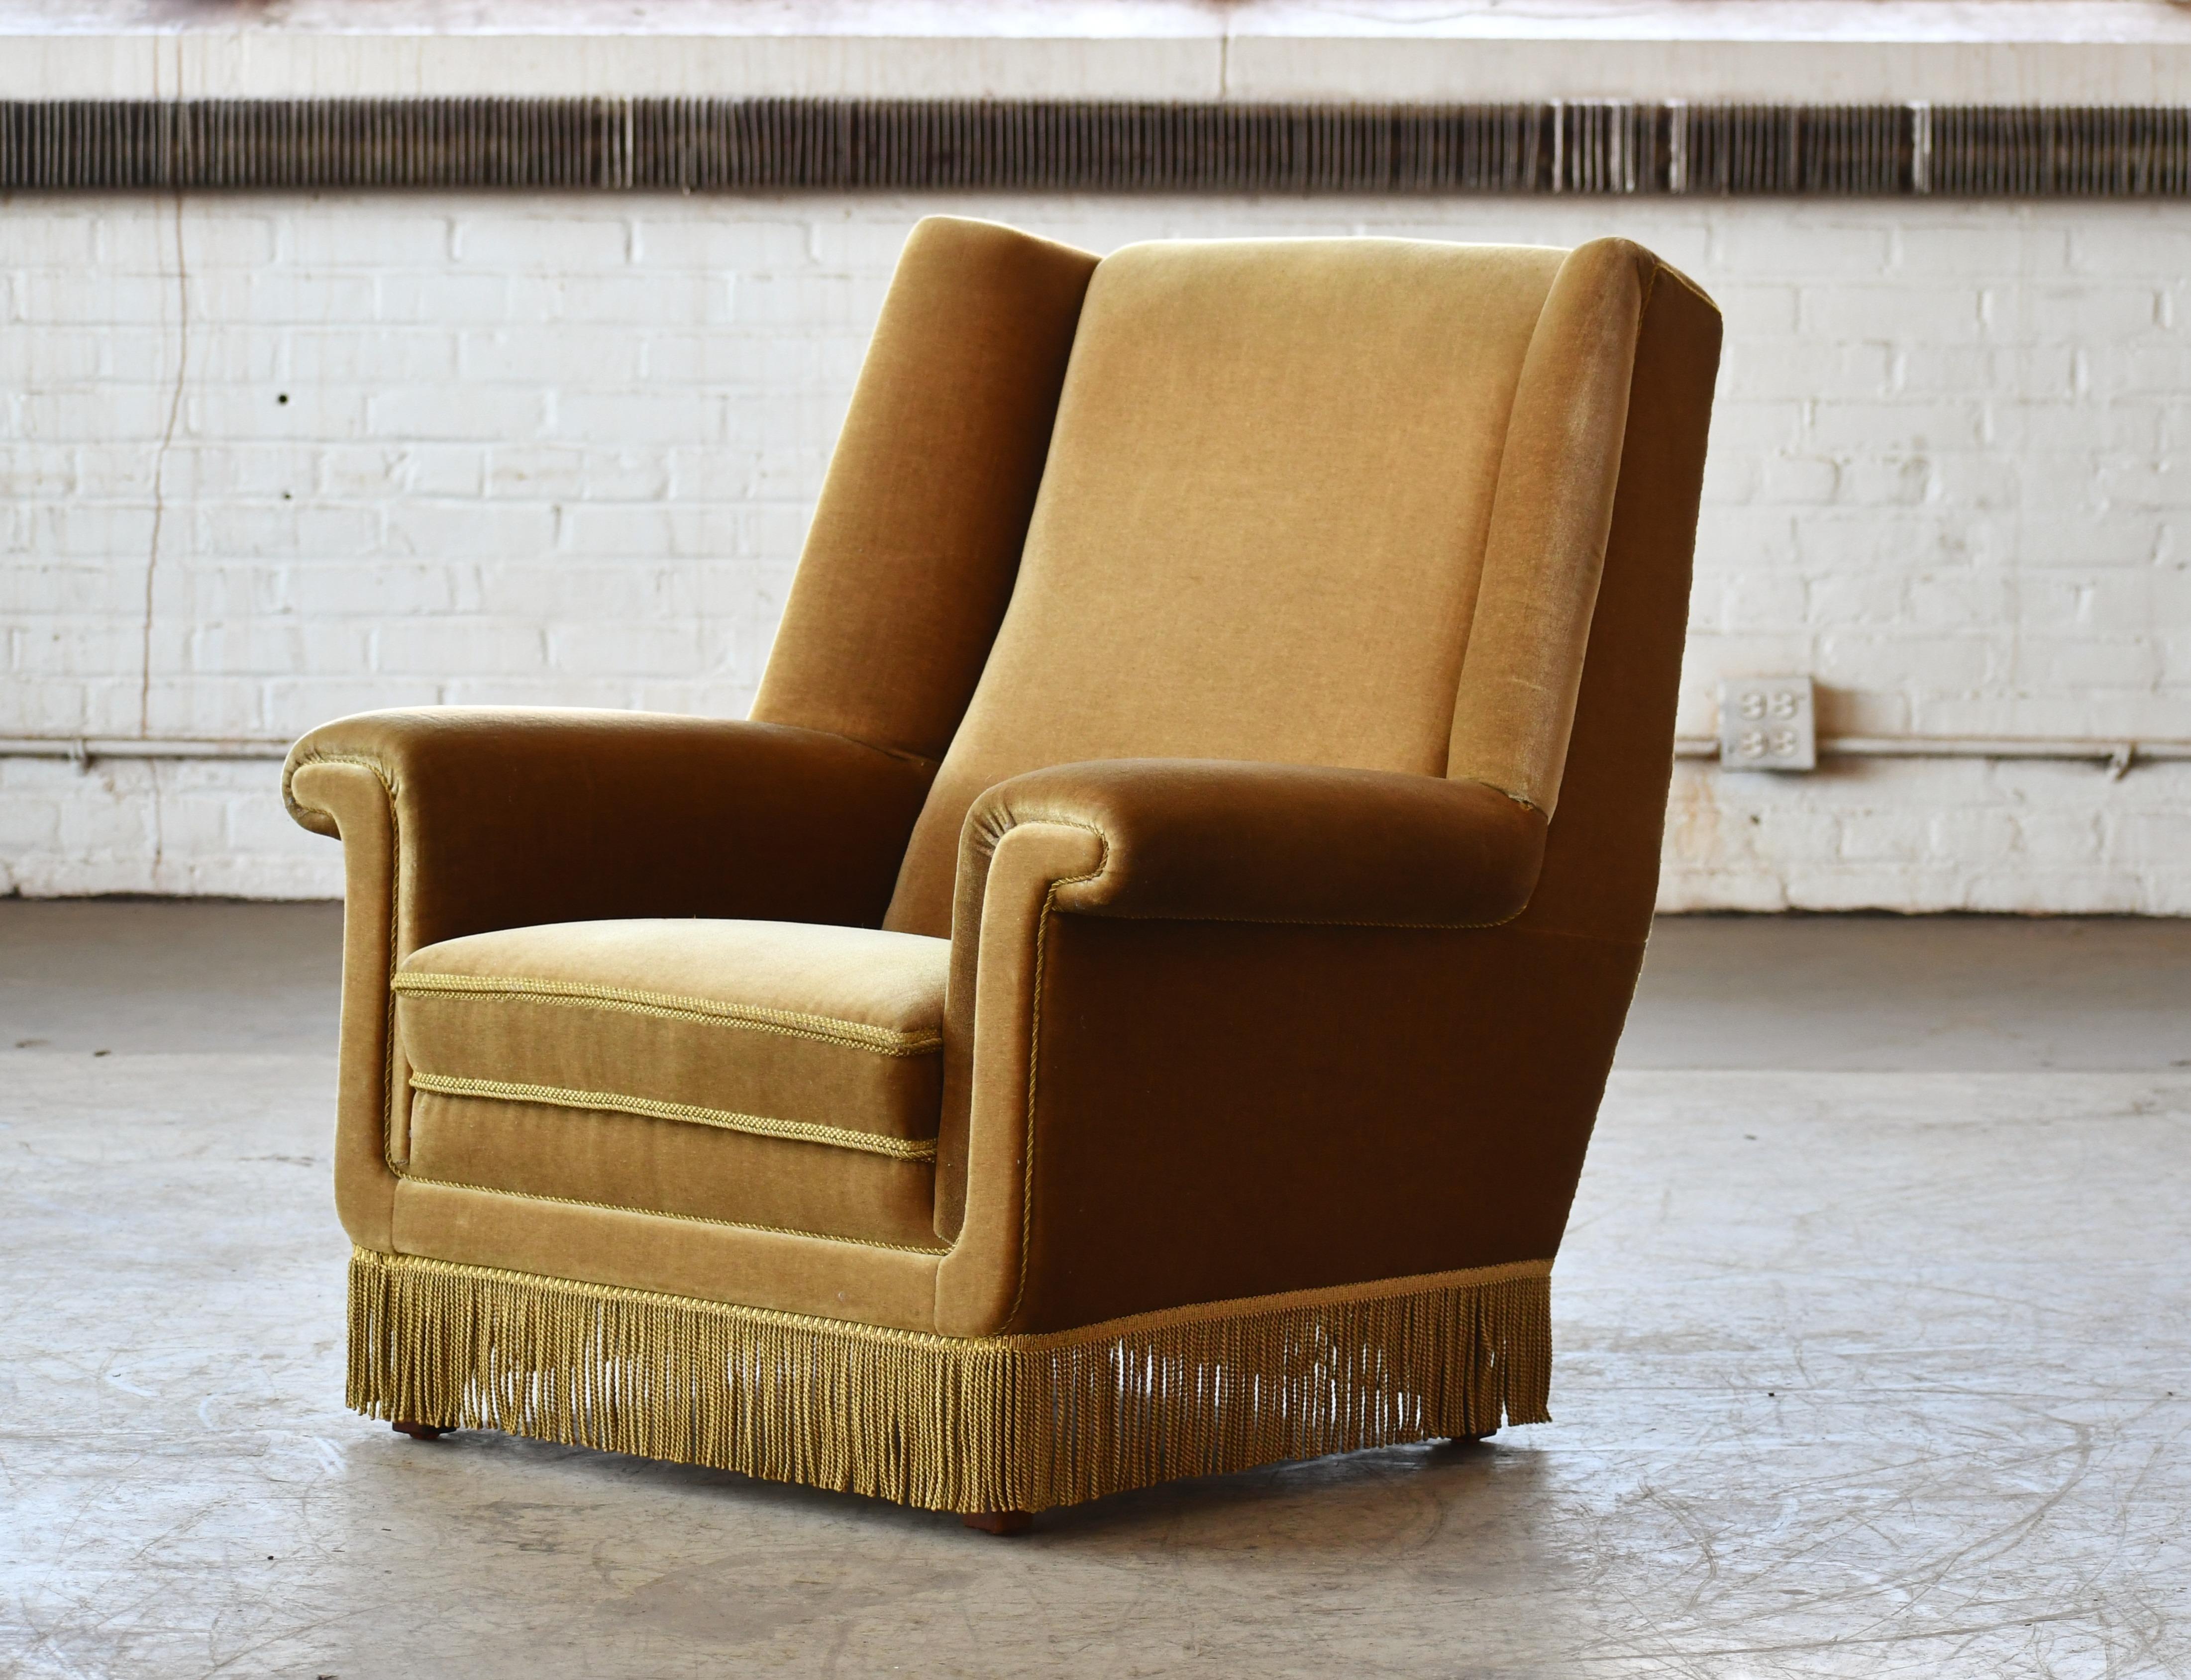 Beautiful highback lounge chair designed by G. Thams for Vejen Polstermobelfabrik ca 1968. The chair was sold through retailer Domus Danish and seen in their catalog in 1968. Very elegant chair with a strong presence. Reupholstered in mohair and